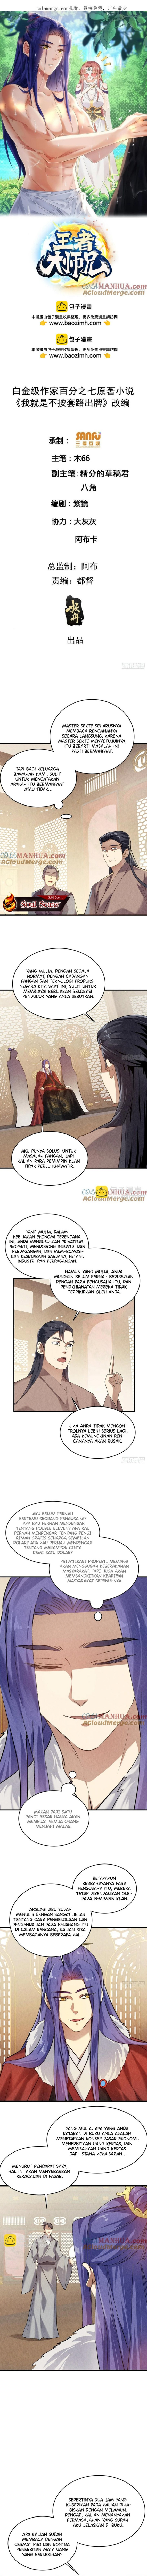 Dilarang COPAS - situs resmi www.mangacanblog.com - Komik i just dont play the card according to the routine 203 - chapter 203 204 Indonesia i just dont play the card according to the routine 203 - chapter 203 Terbaru 1|Baca Manga Komik Indonesia|Mangacan